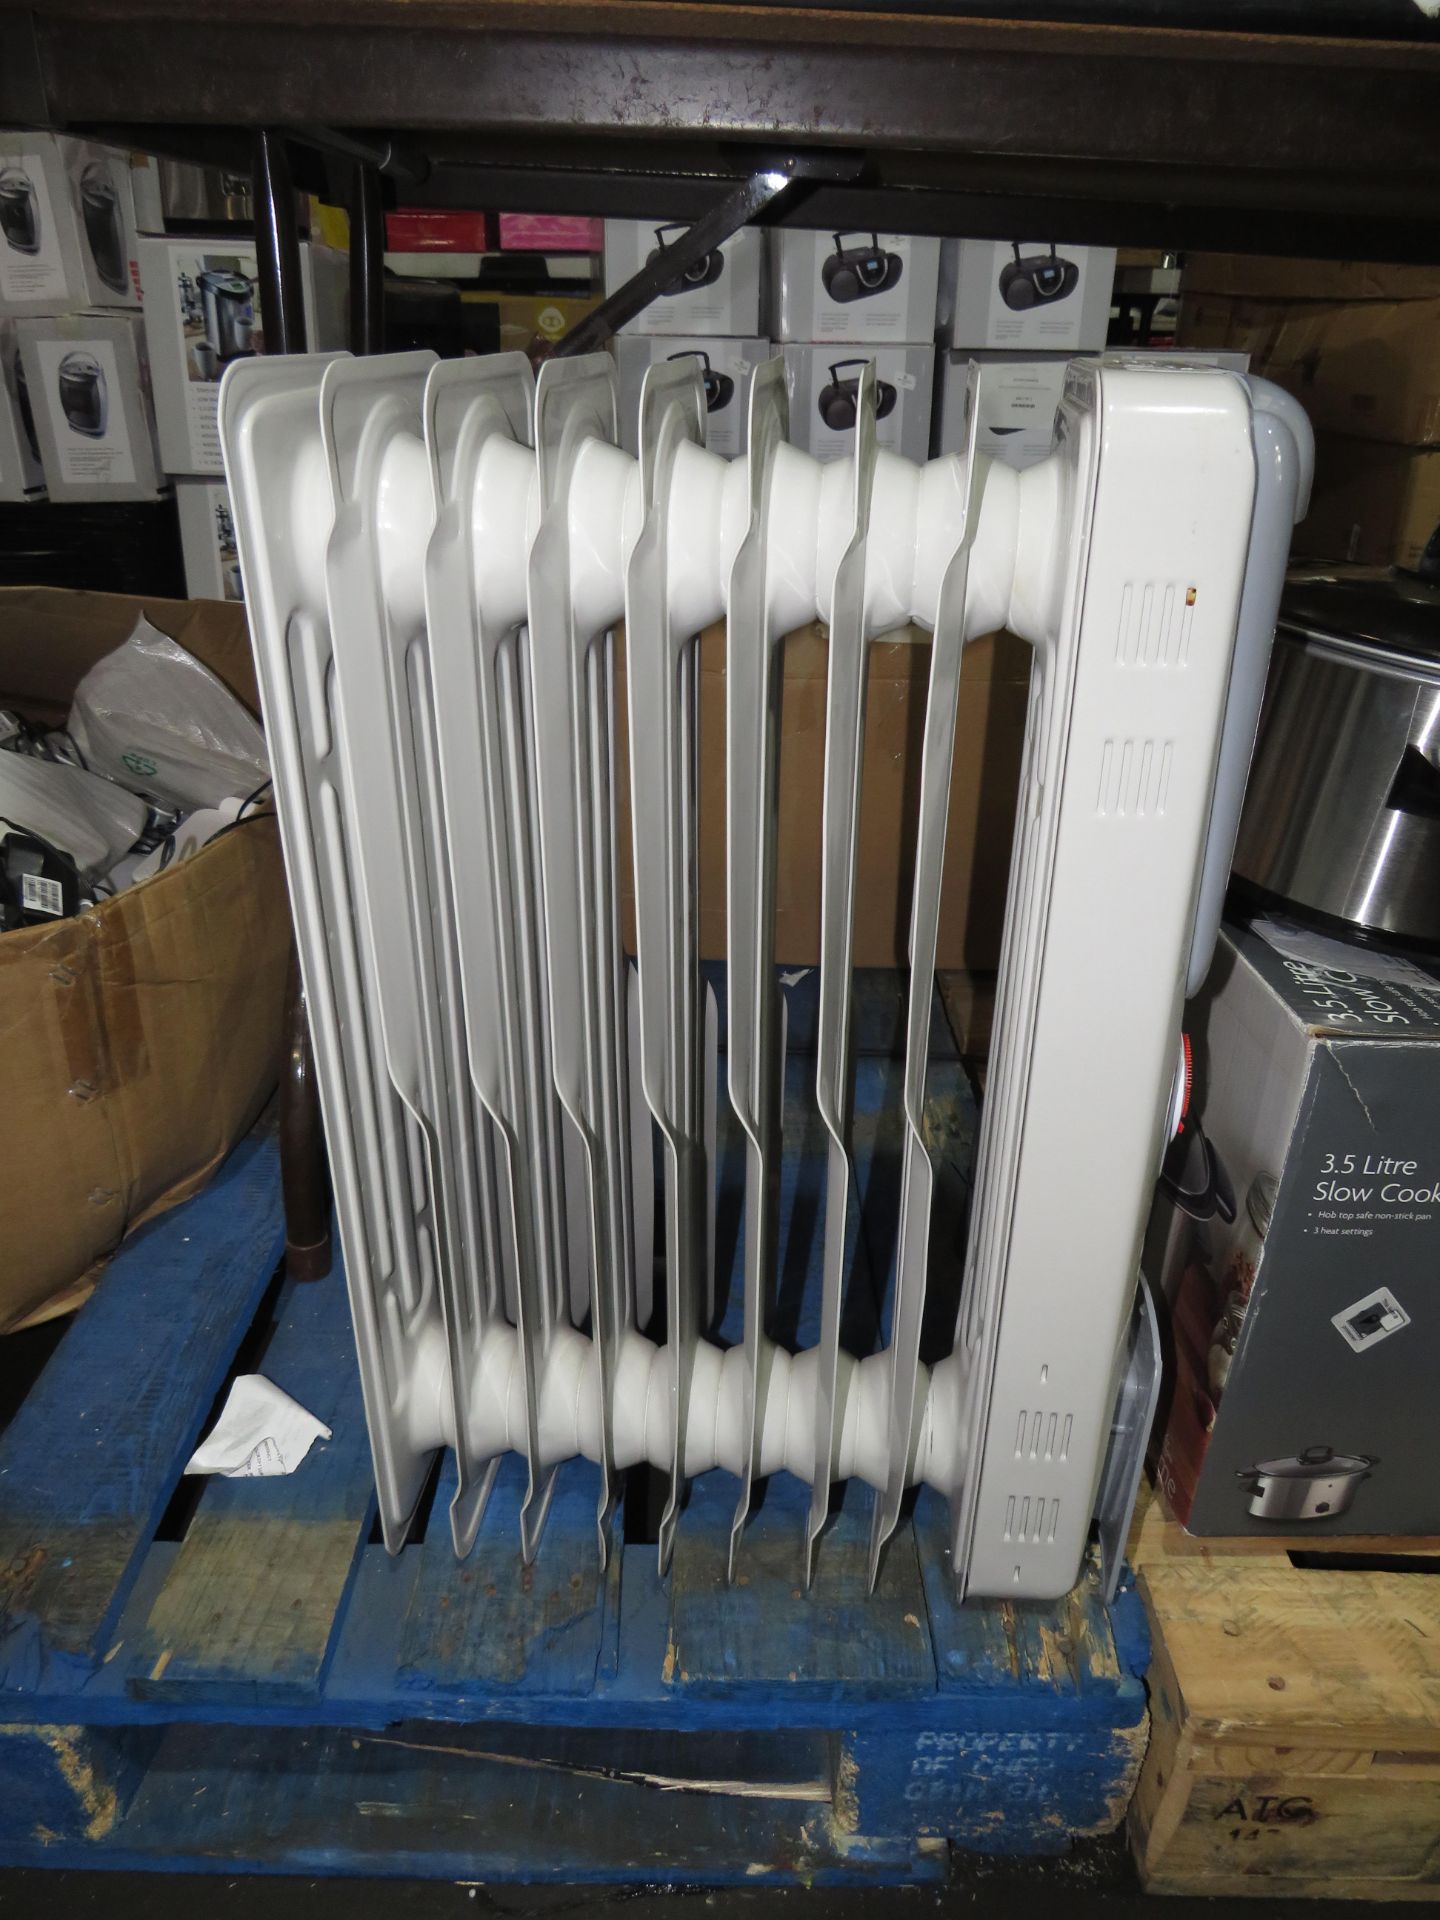 Electric oil filled radiator, tested working but missing feet and packaging